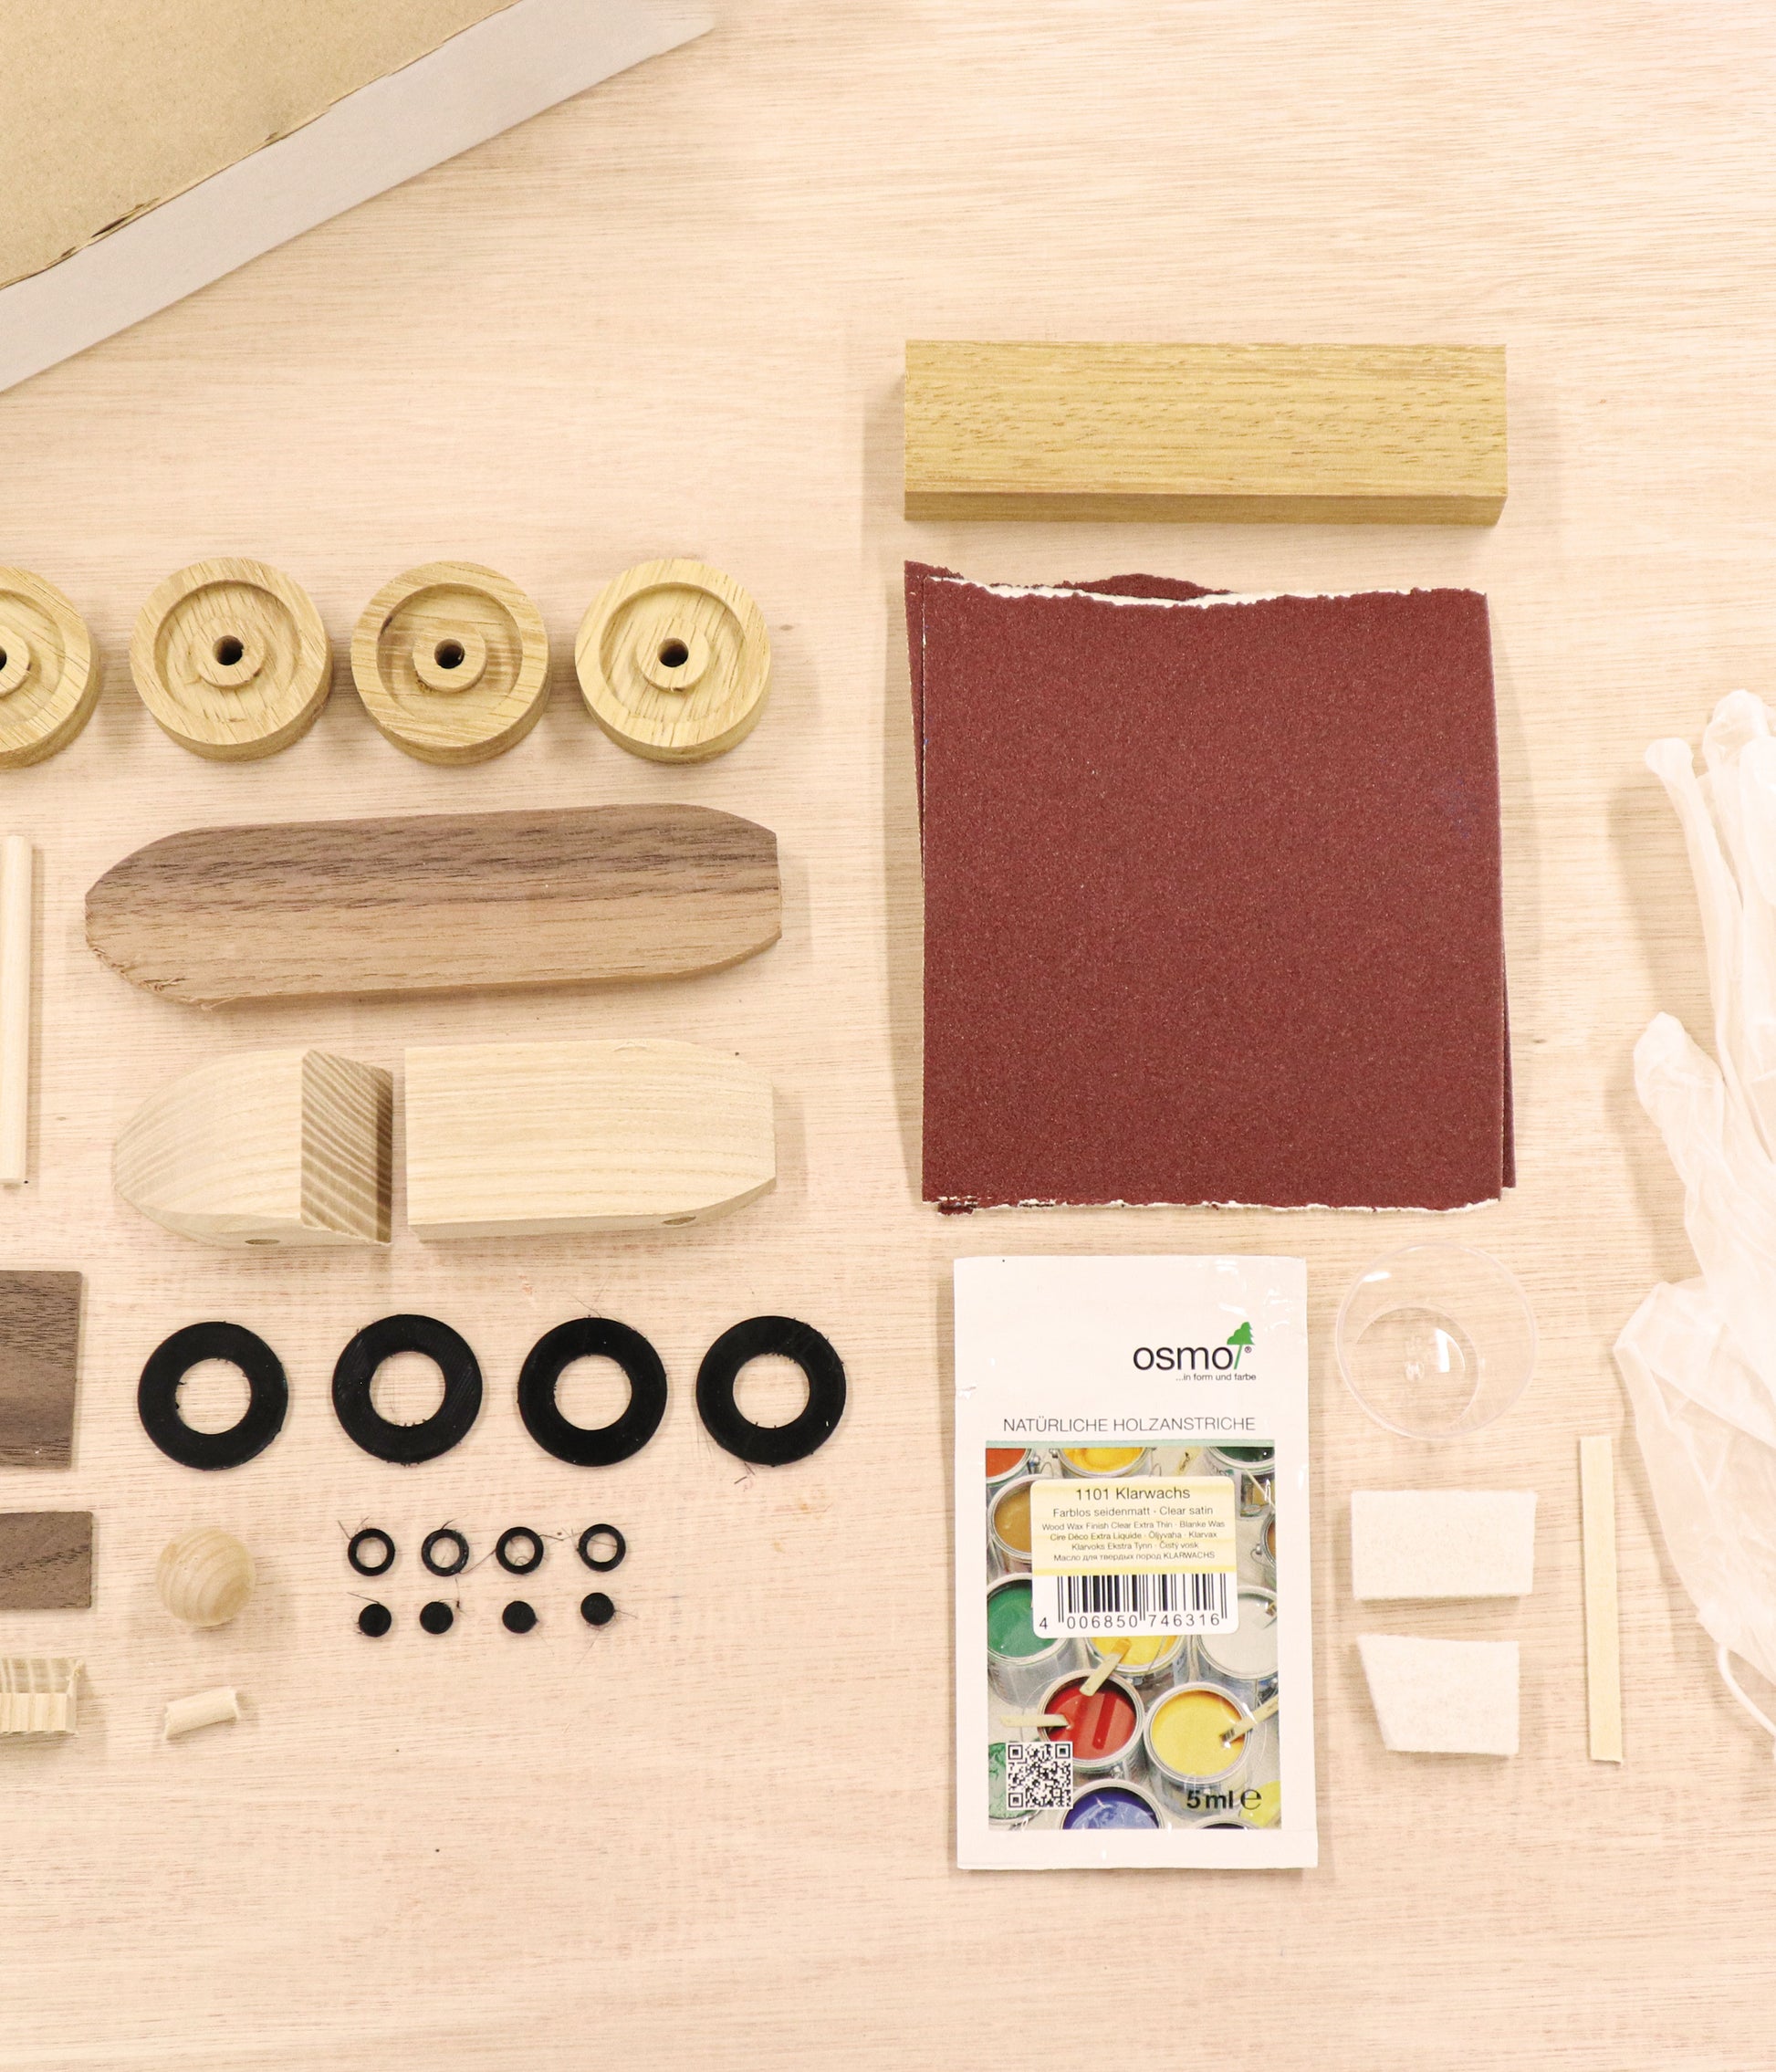 Stirling limited edition classic wooden car making kit